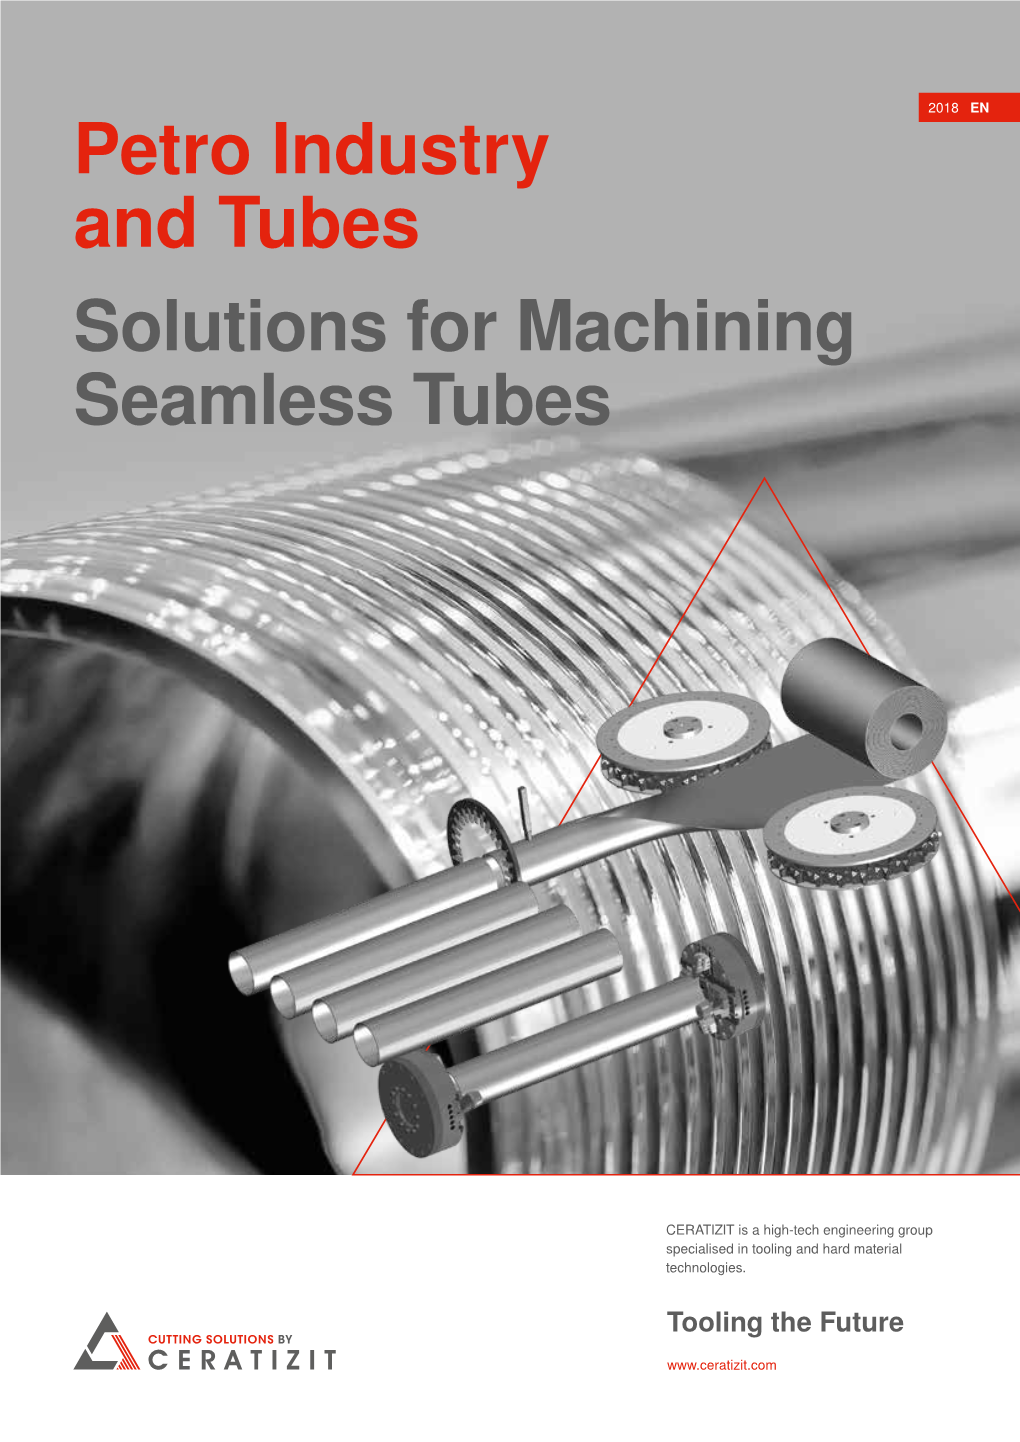 Solutions for Machining Seamless Tubes